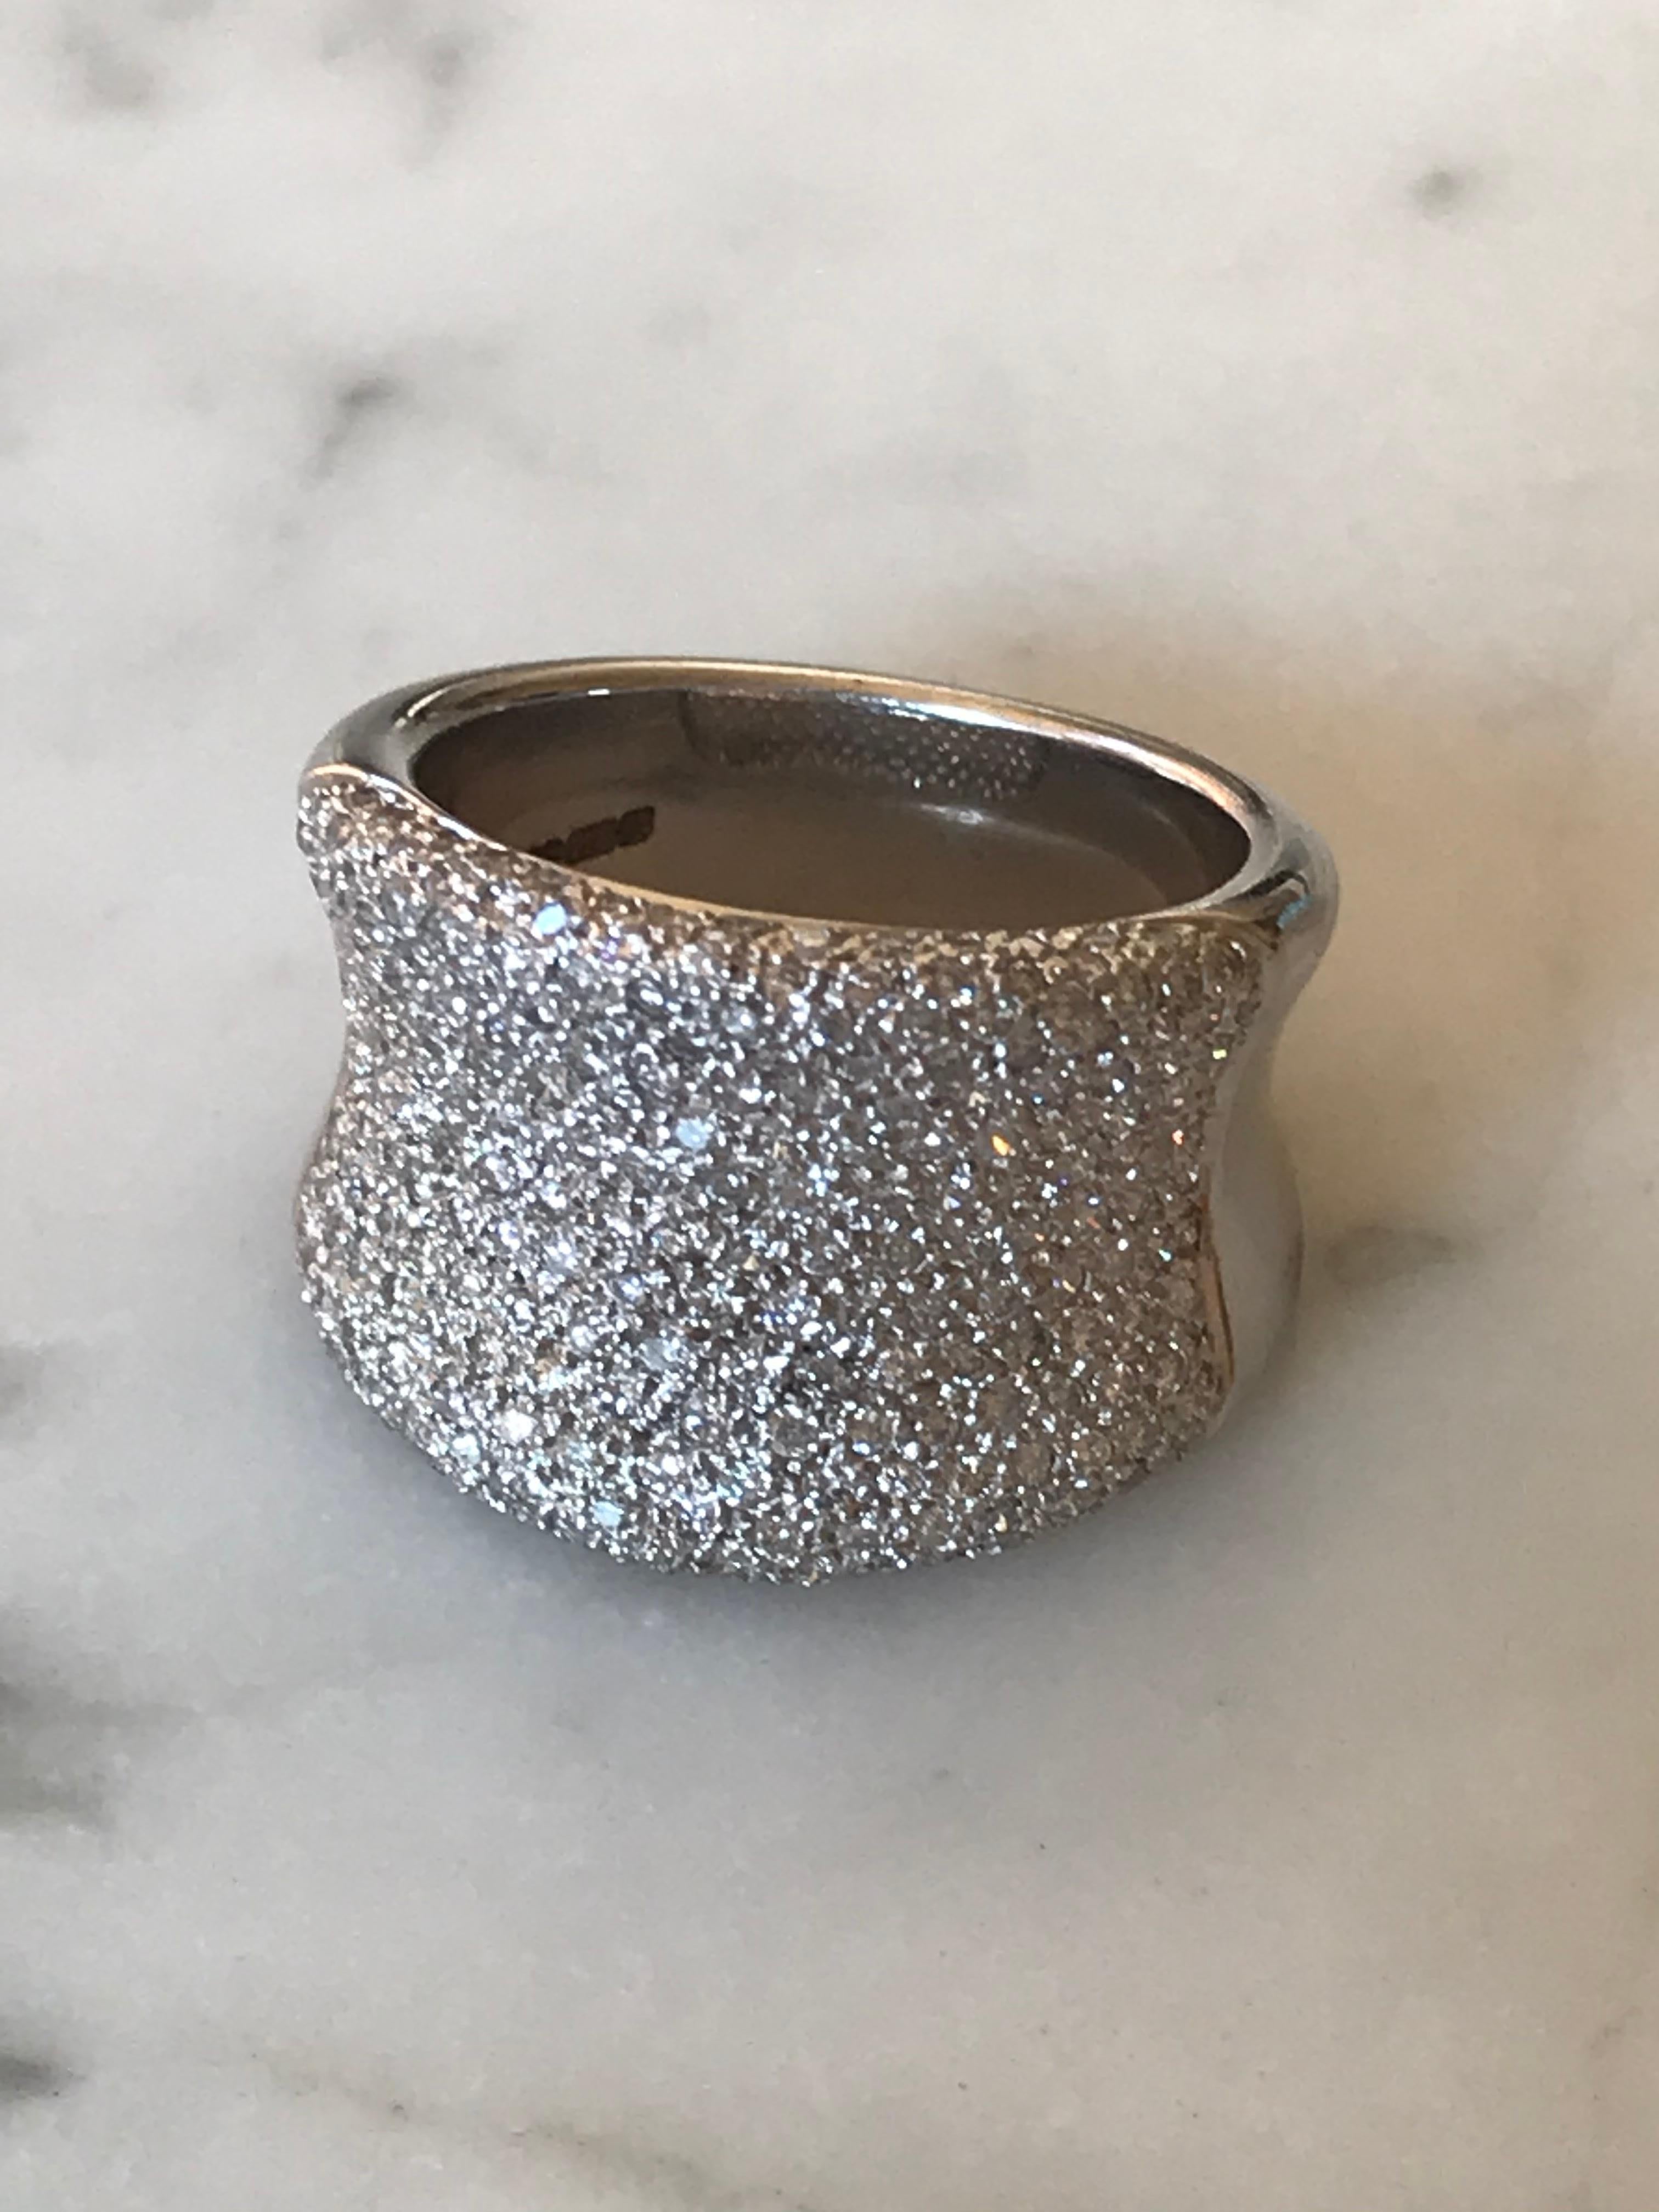 Wide Pavé Diamond Bombe Concave Cocktail ring in 18k white gold. Featuring 1.3 carats of brilliant cut diamonds and measuring 1.5cms at the wide point. finger size 7.

Pavé pronounced “pa-vay,” originates from the French word “to pave” — in this